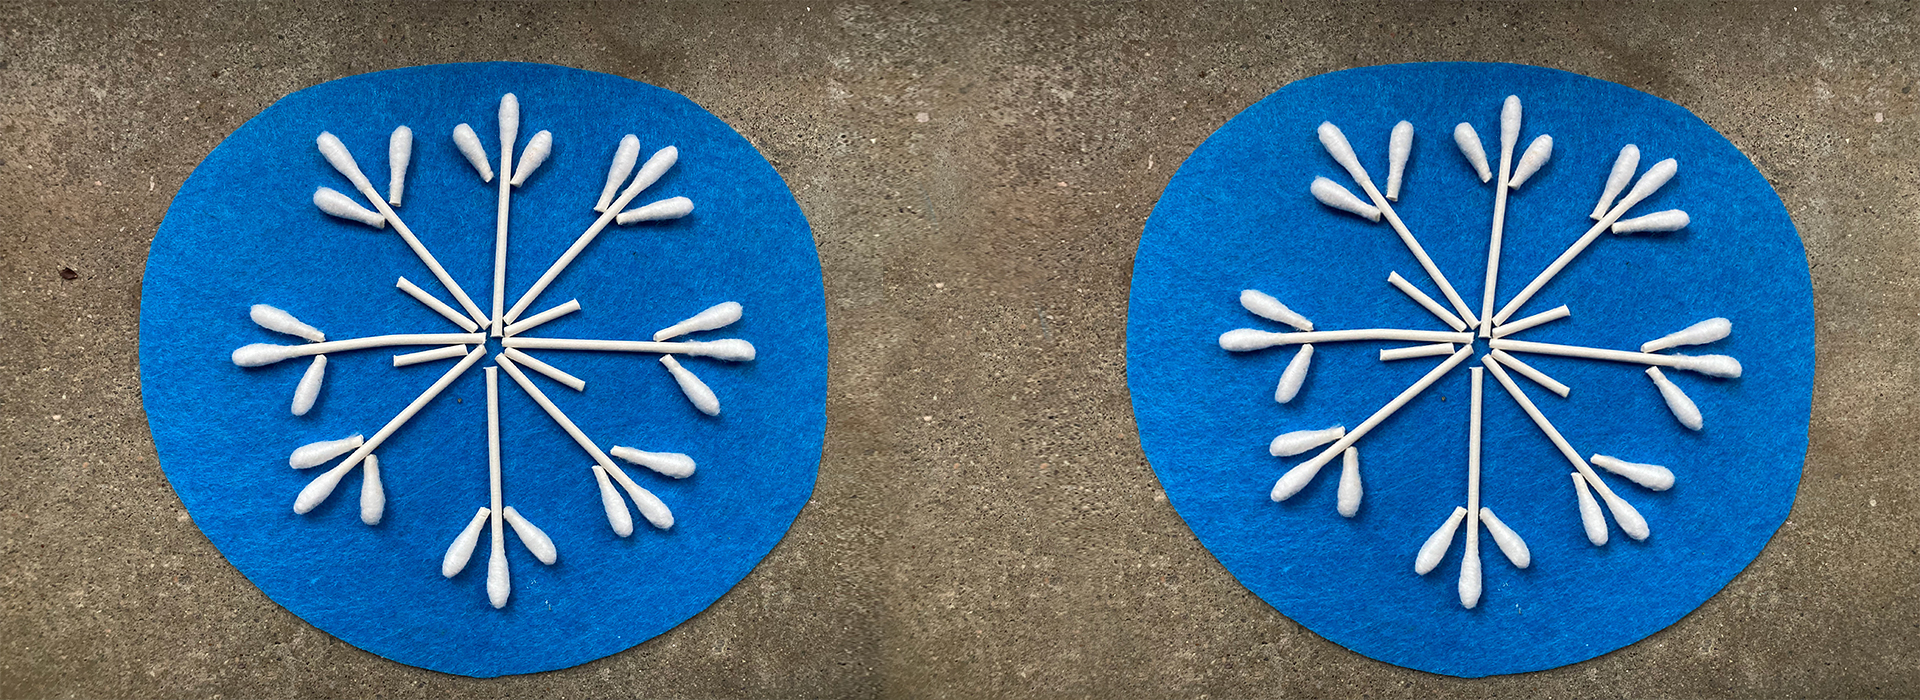 Two blue pieces of felt have snowflake shaped art made out of cotton swabs